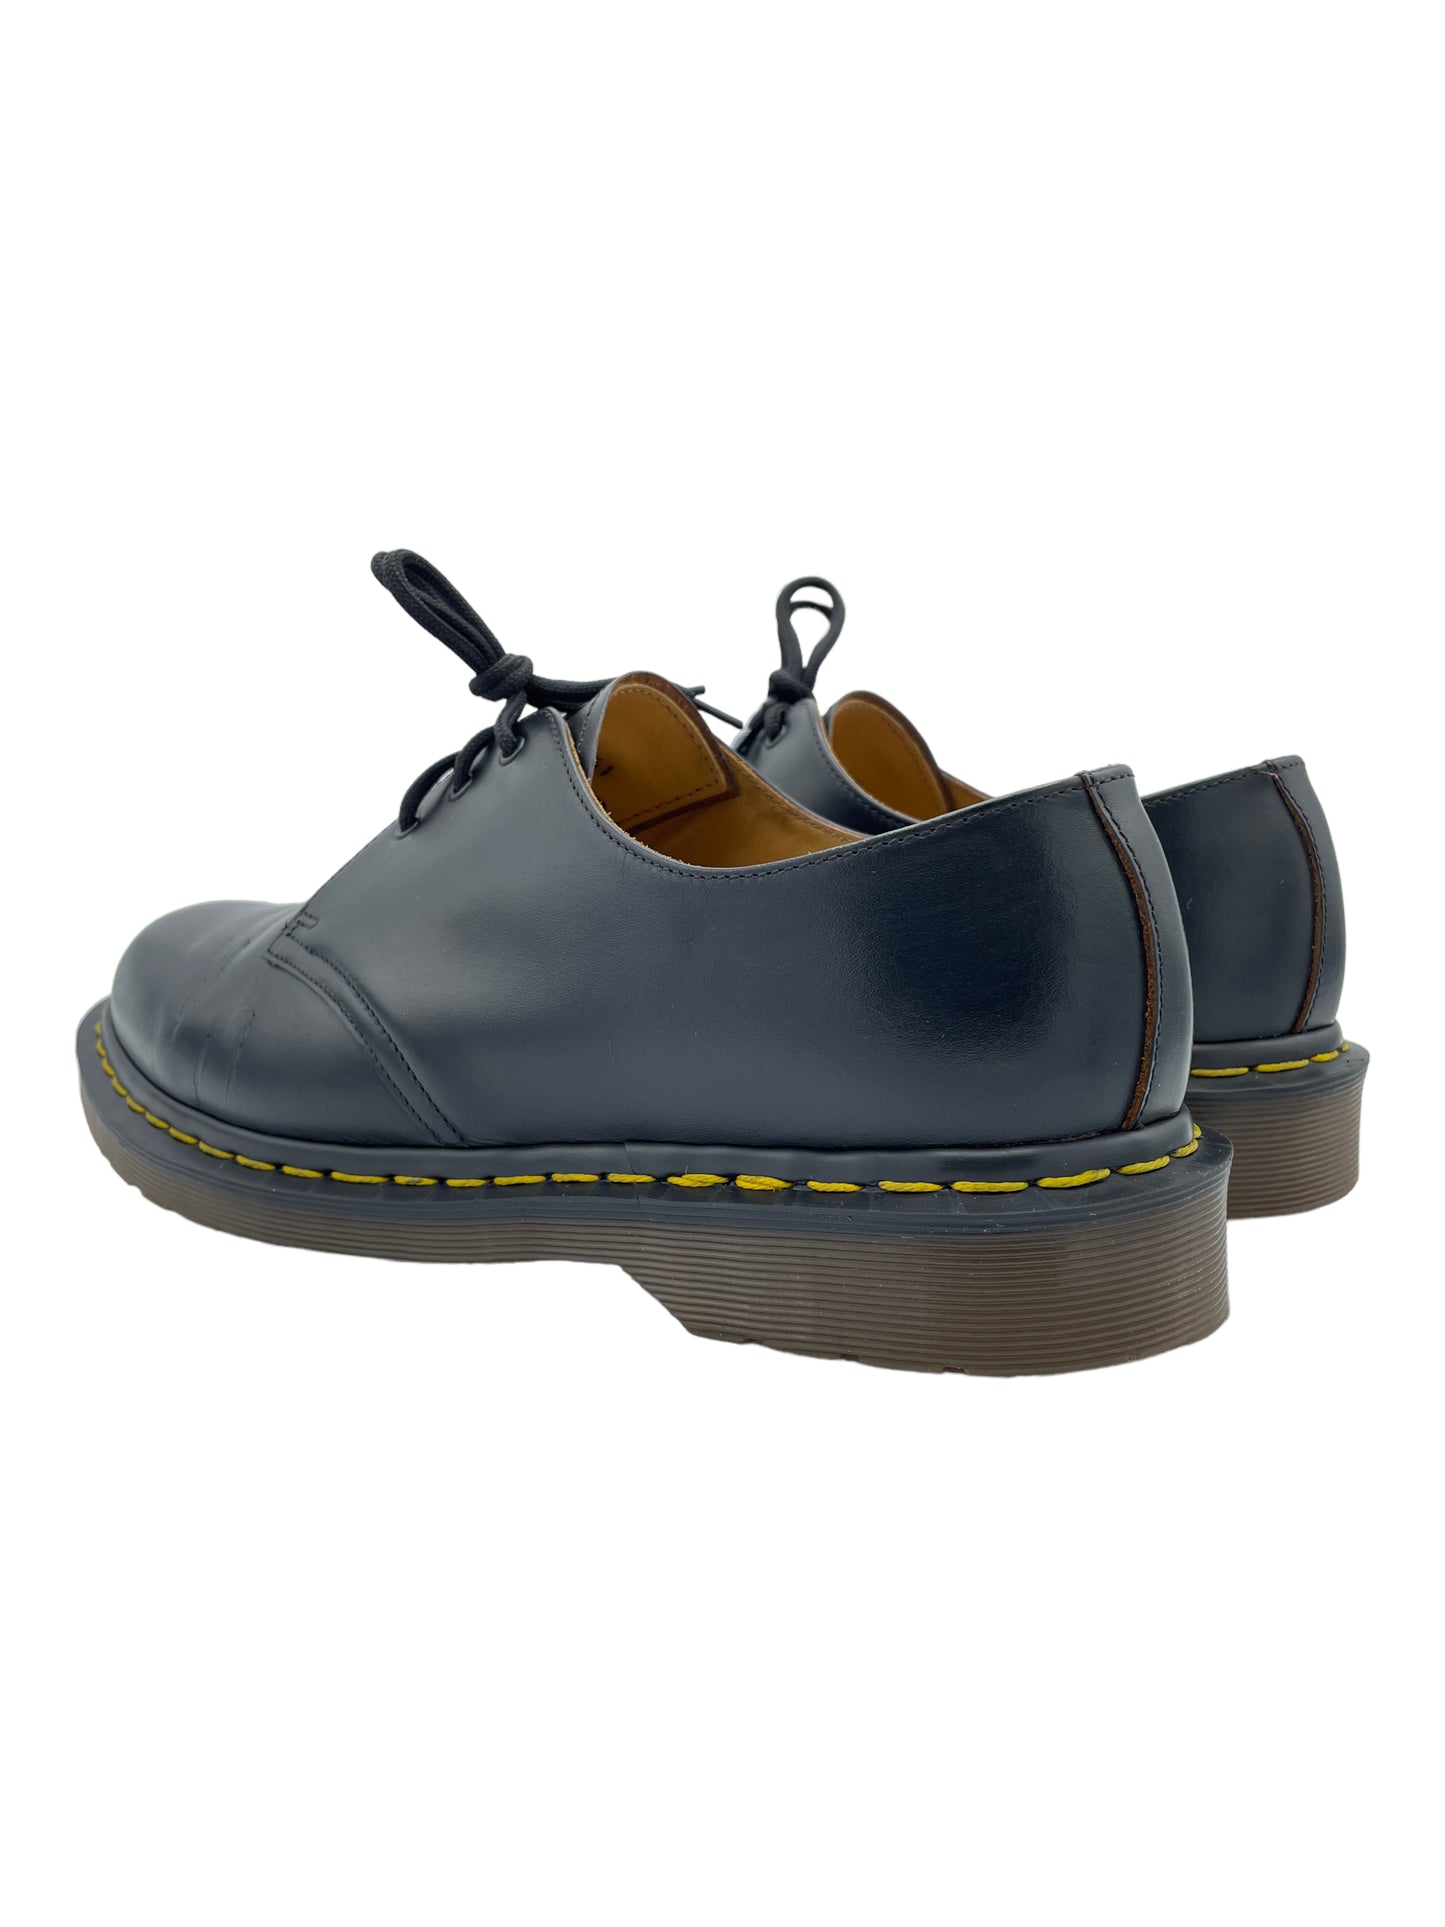 Dr Martens Black 'Made in England' 1461 Shoes - Genuine Design Luxury Consignment for Men. New & Pre-Owned Clothing, Shoes, & Accessories. Calgary, Canada